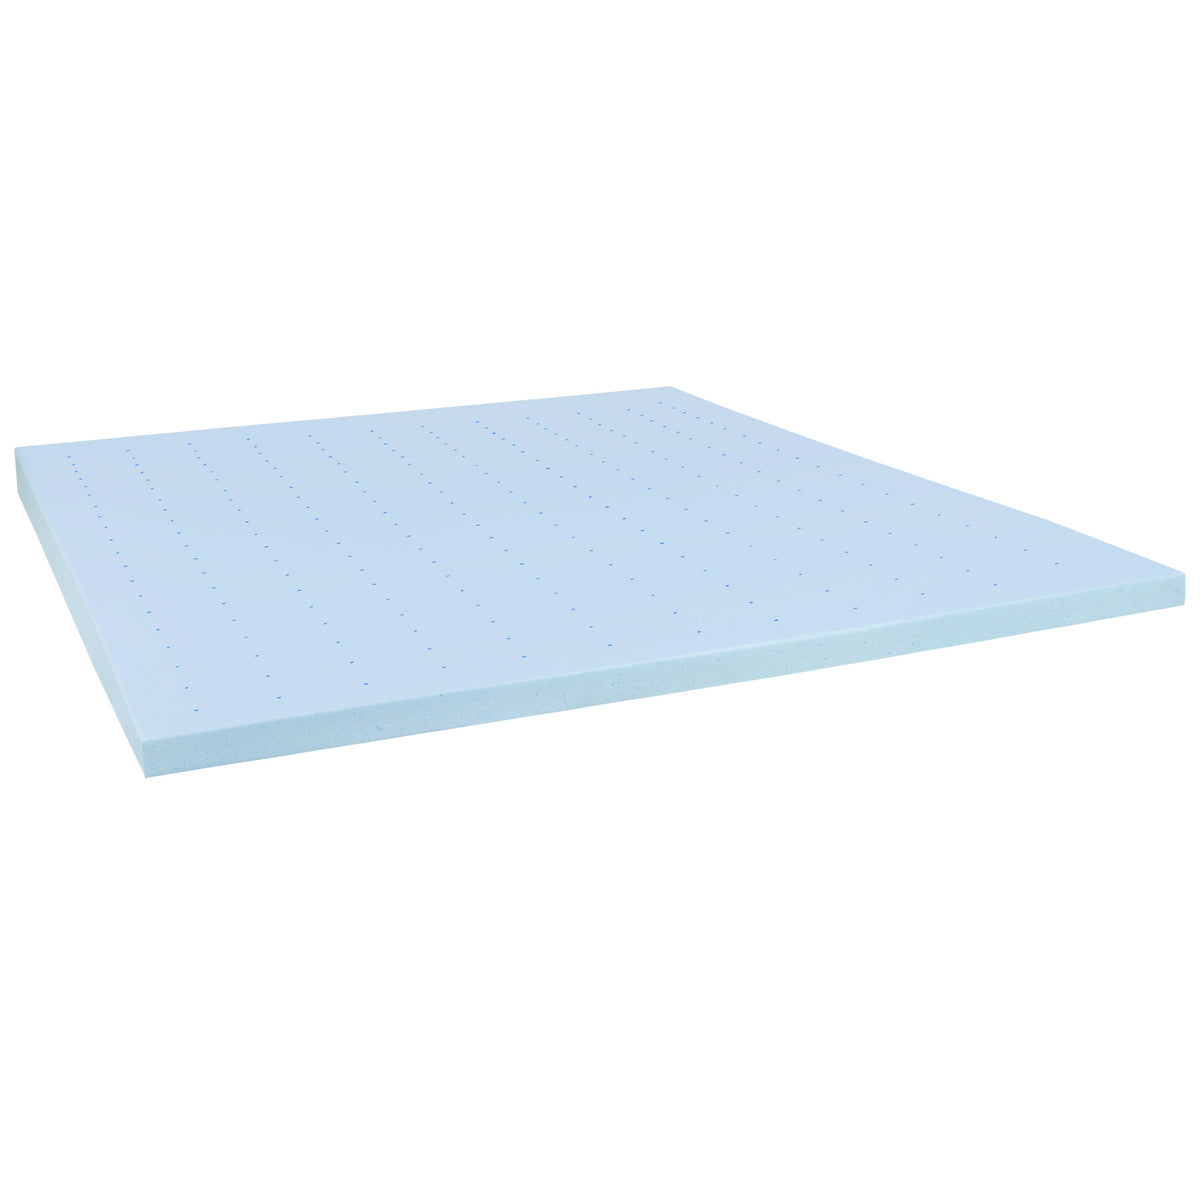 King |#| 3inch Cool Gel Infused Hypoallergenic Cooling Memory Foam Mattress Topper - King